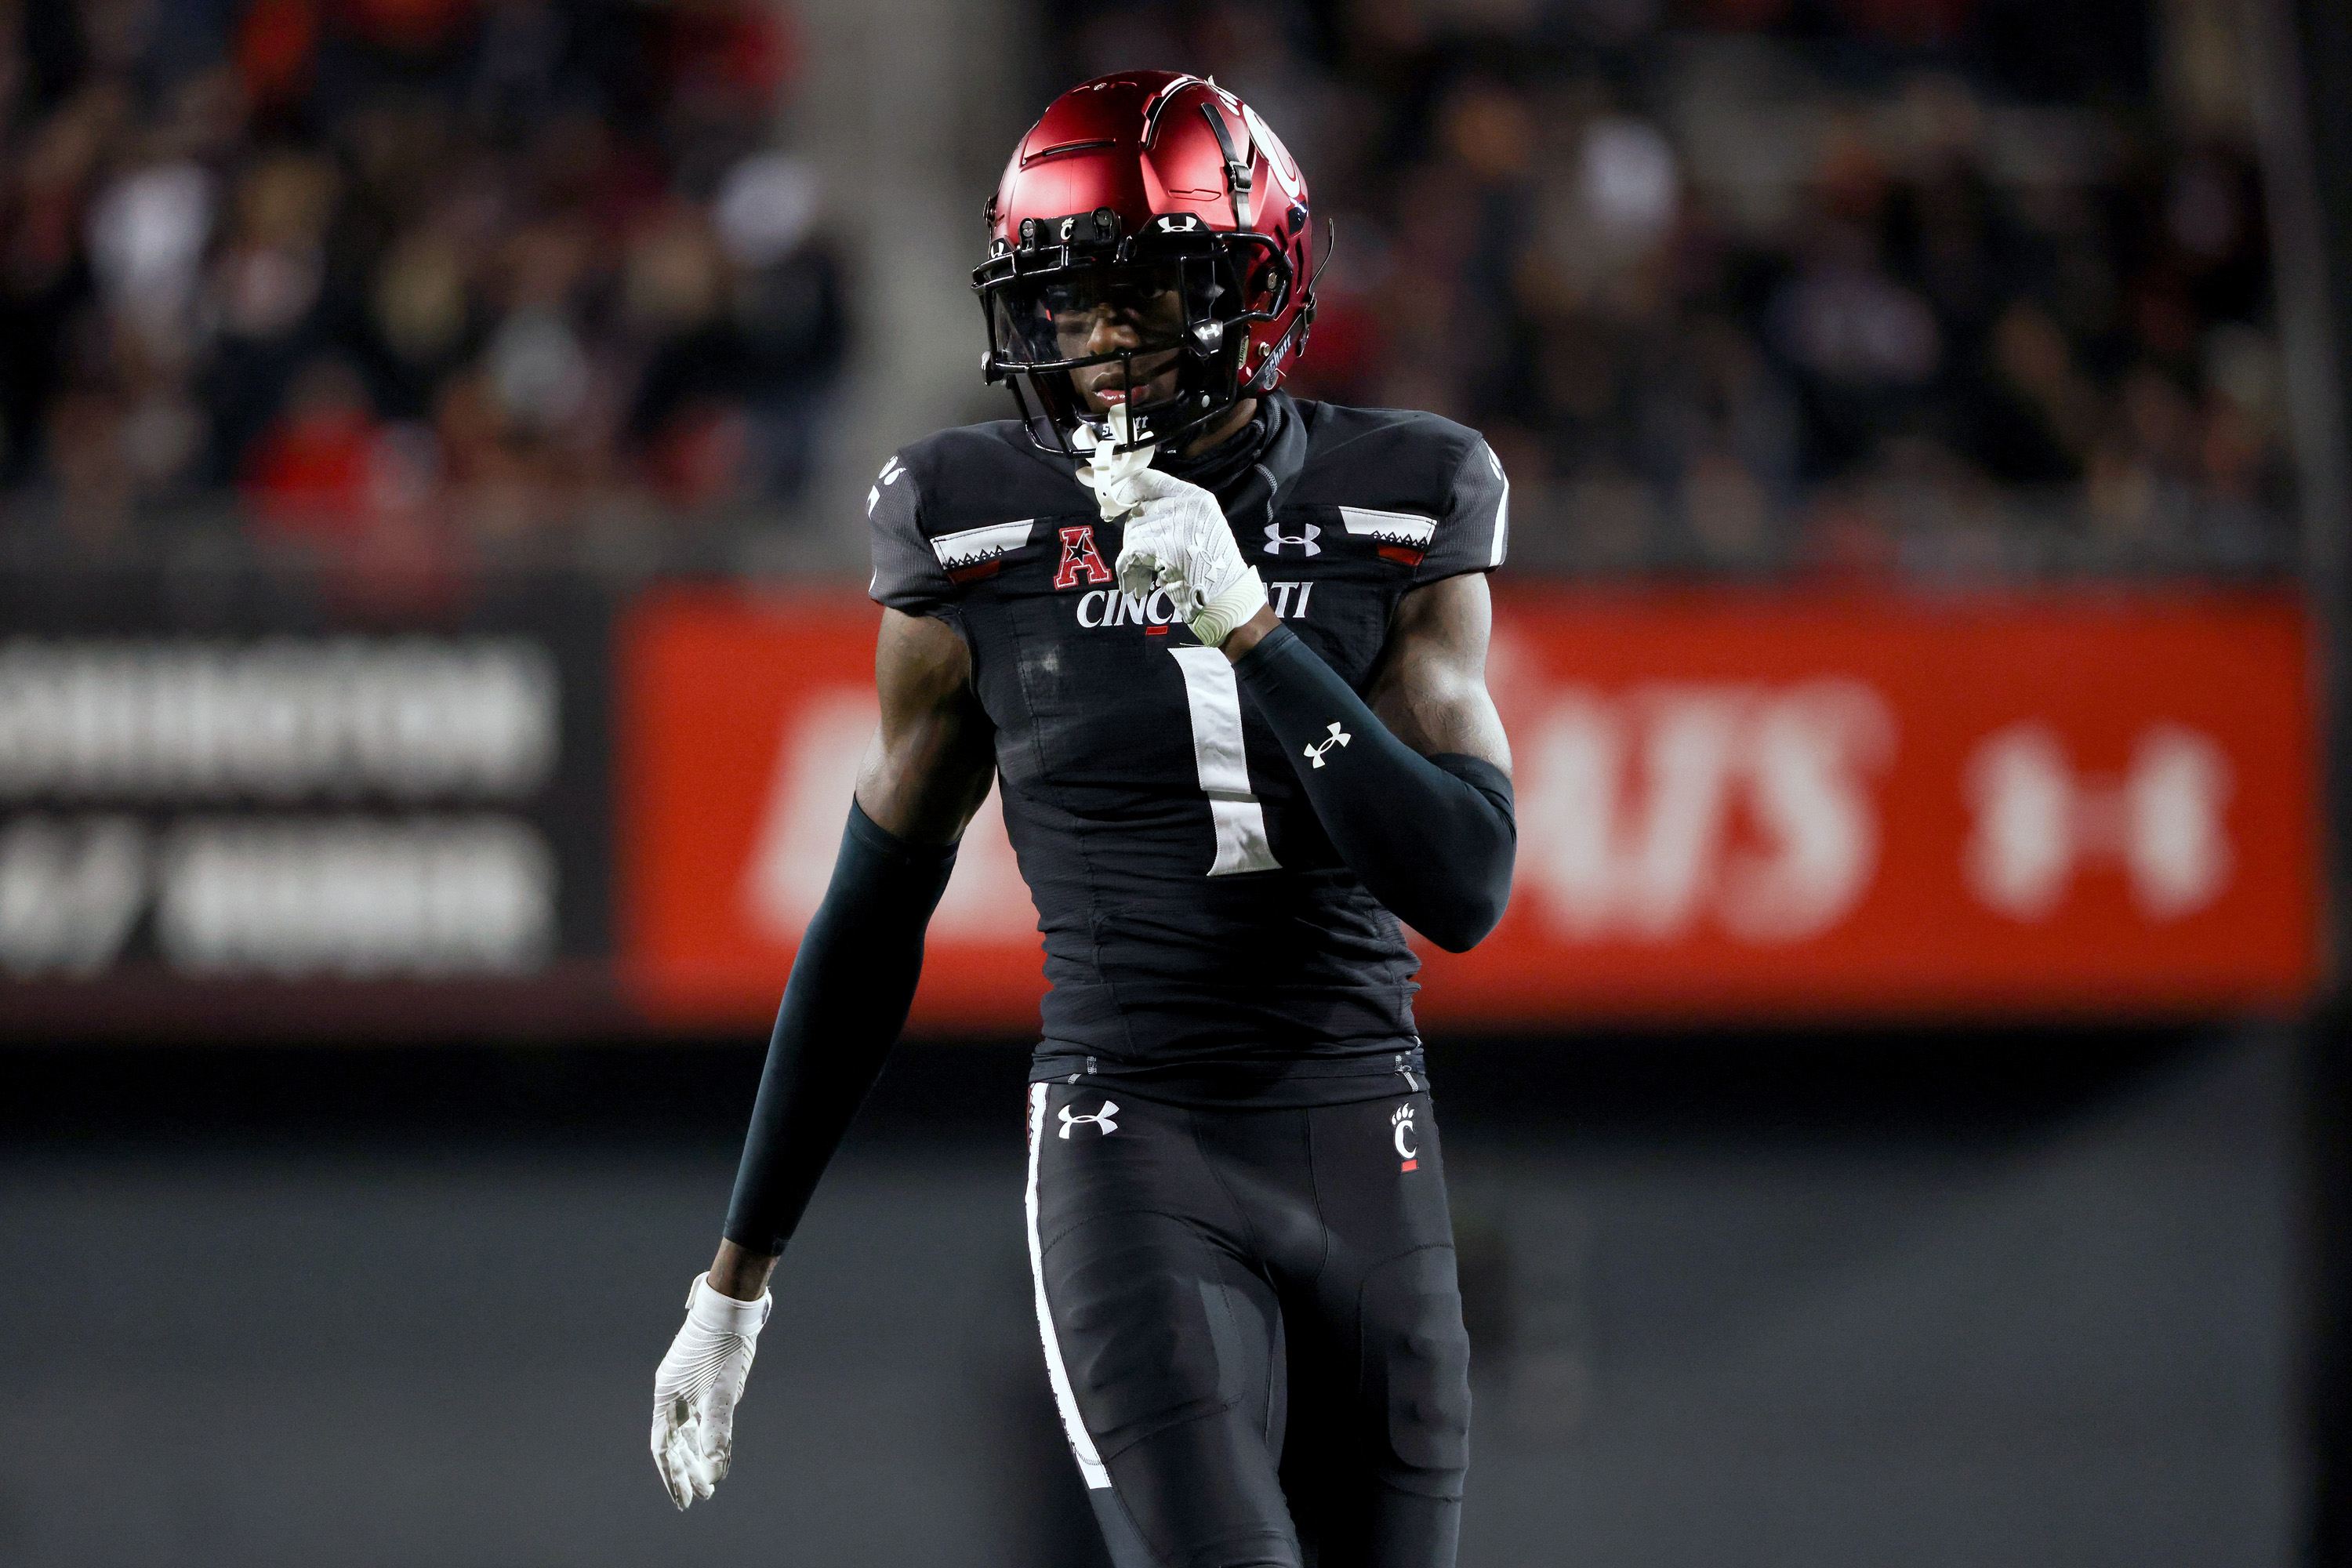 Playing Best Case/Worst Case for the 2018 Cincinnati Bearcats